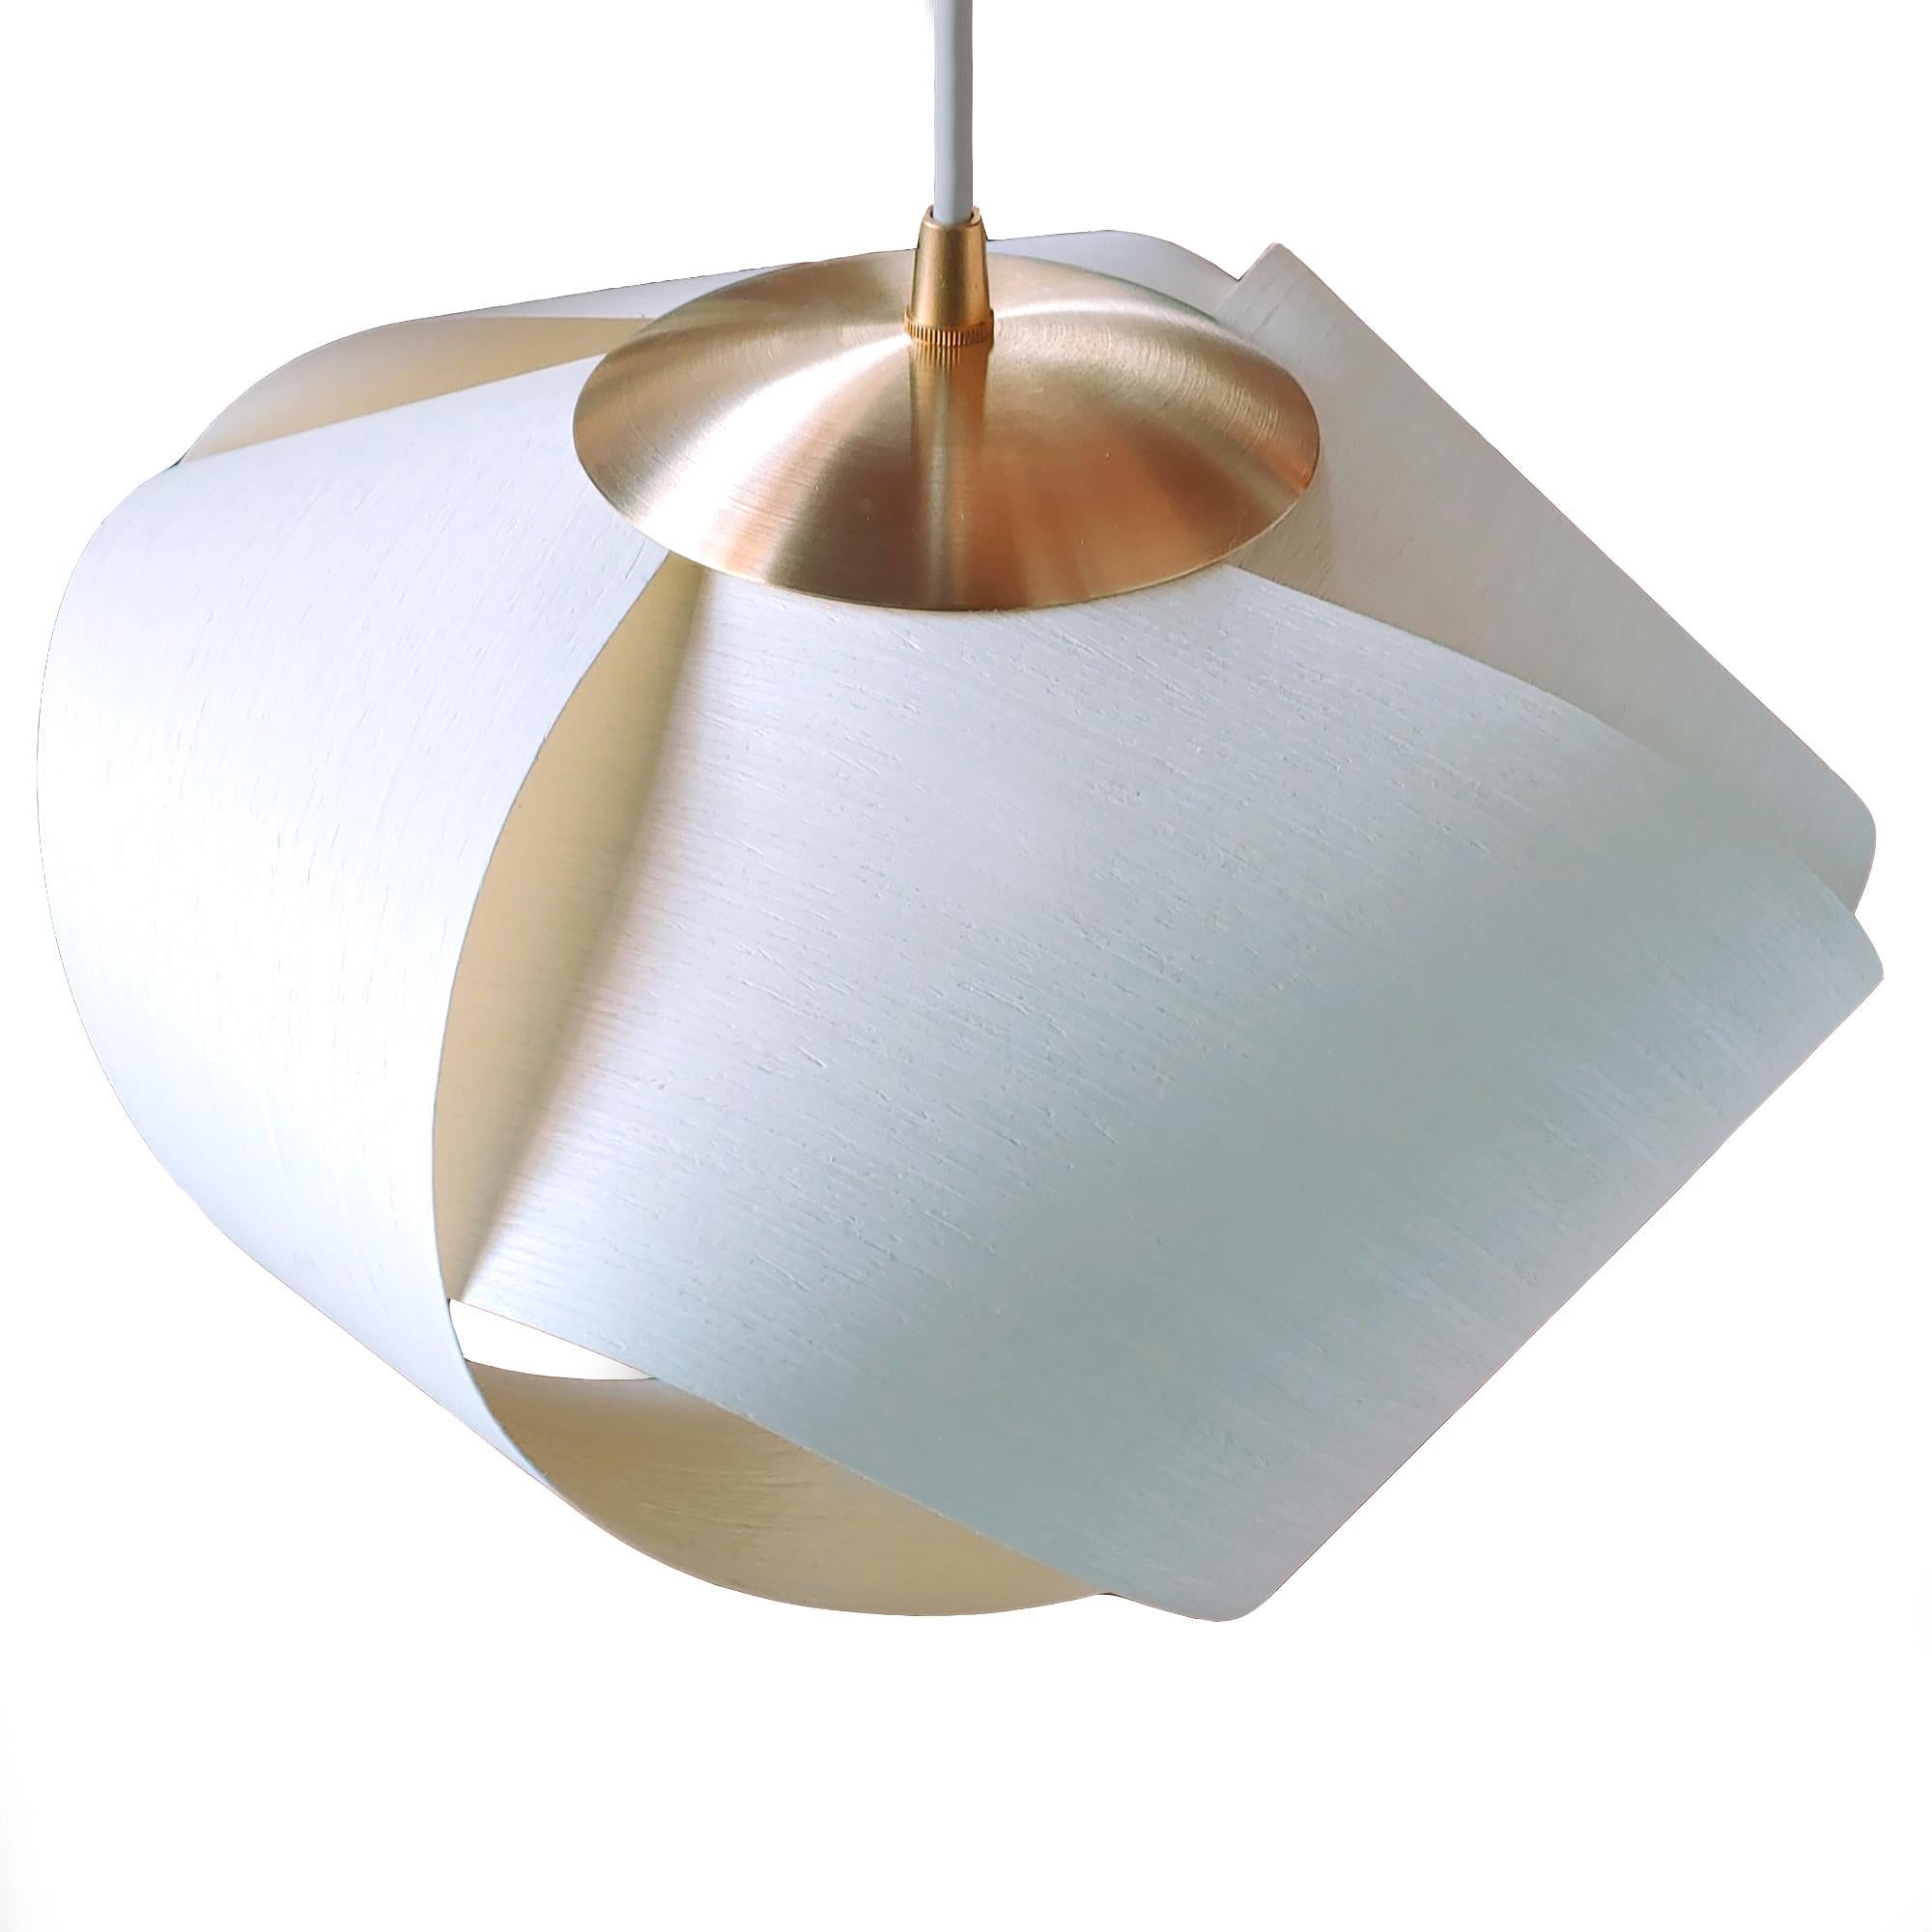 PETAL, featuring brushed brass hardware, is a contemporary Mid-Century Modern light fixture. An Organic-Modern piece with wood veneer and a brushed brass accent. This is a minimalist luxury pendant design which can be exhibited in dining rooms,